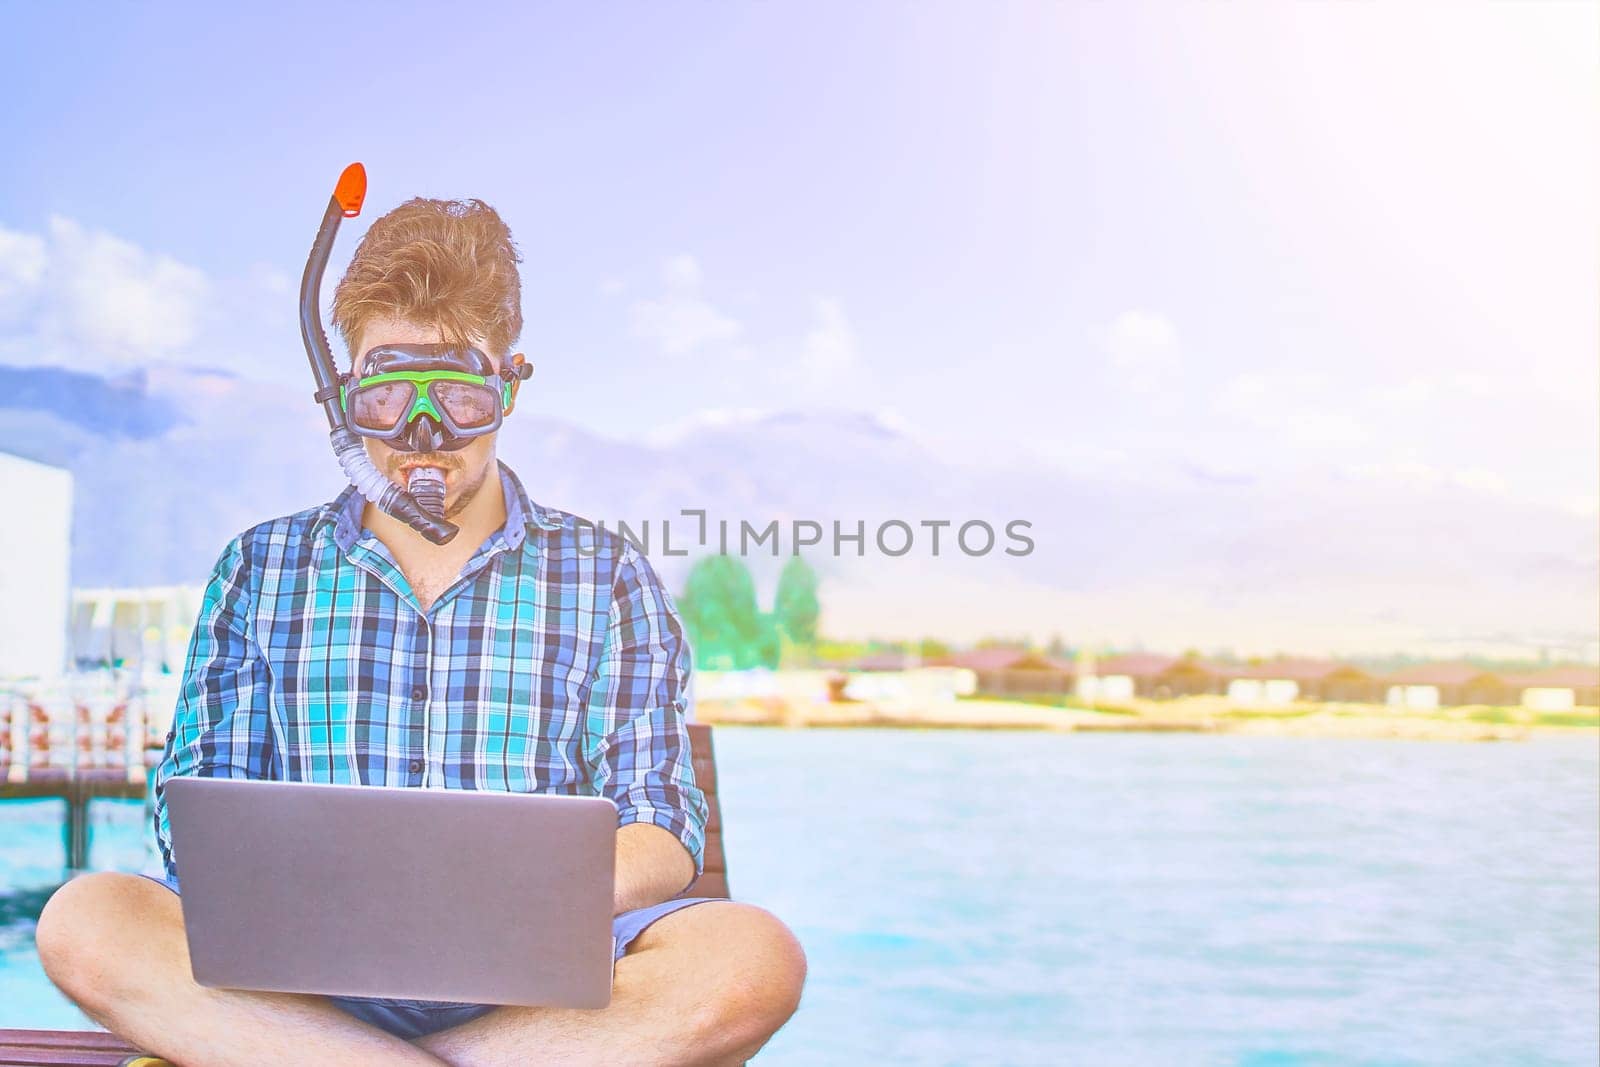 A man in an underwater mask, on vacation at sea, working at a computer.